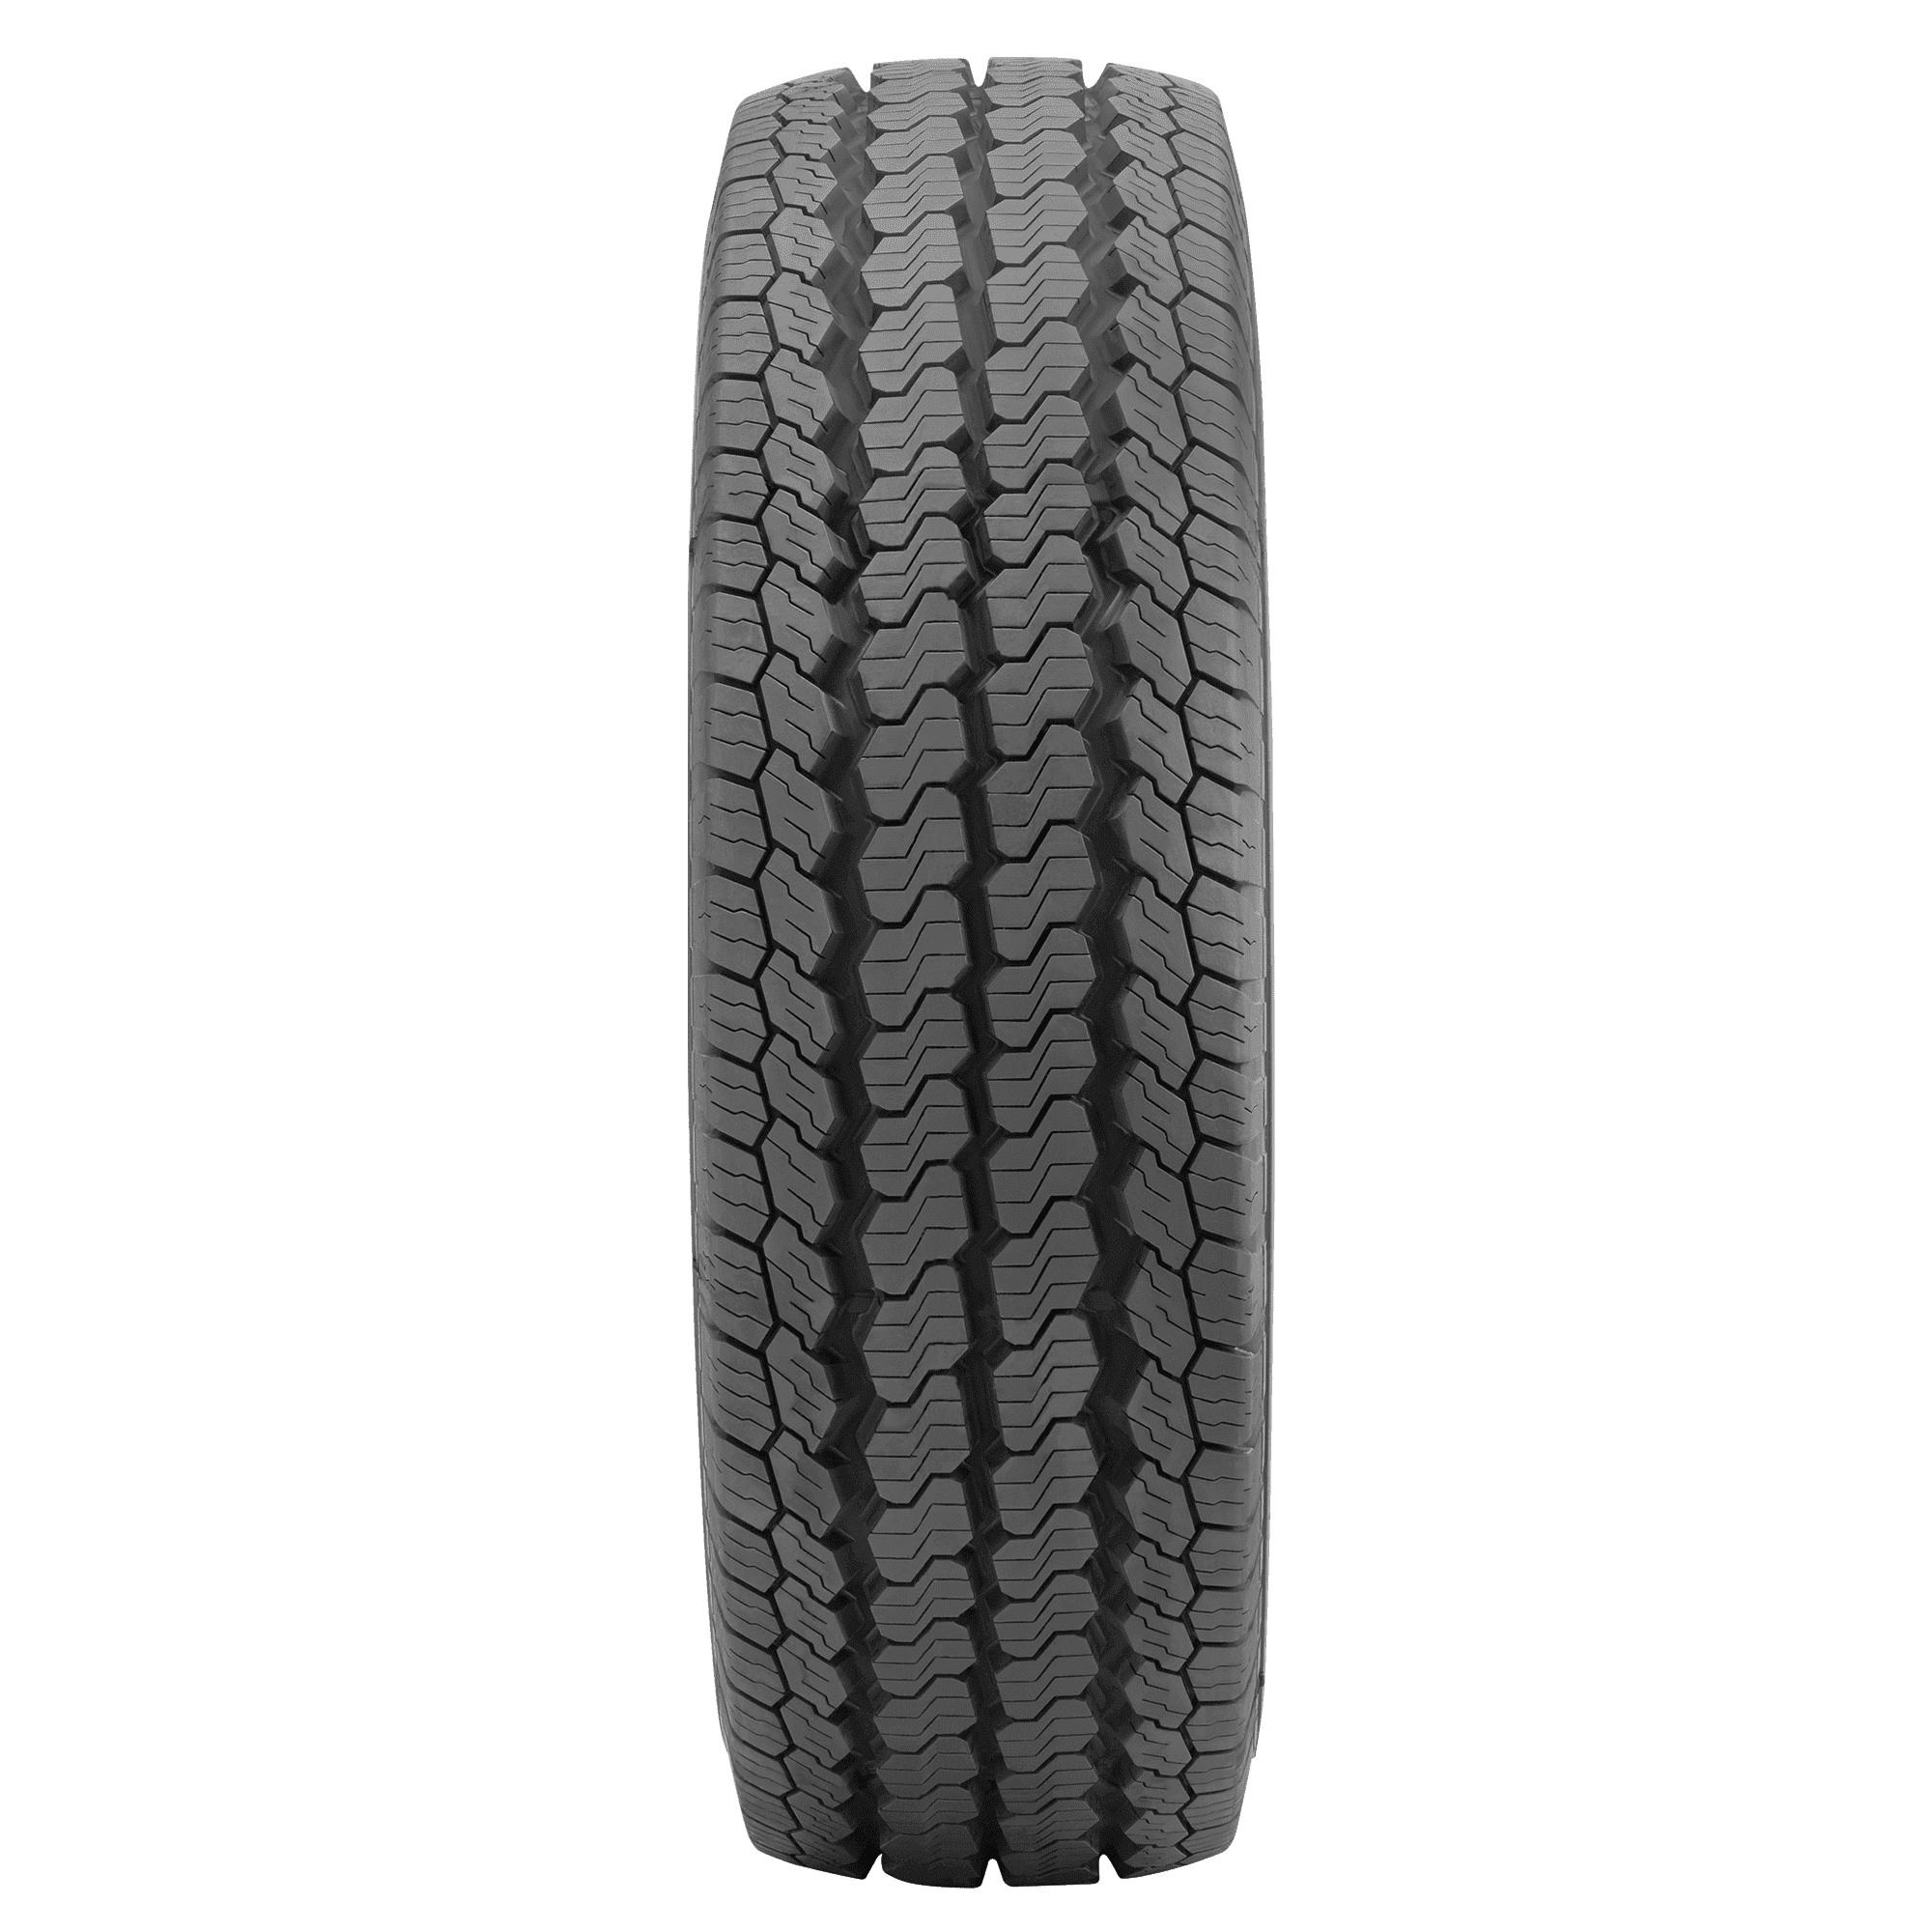 Shop for 185/60R15 Tires for Your Vehicle | SimpleTire